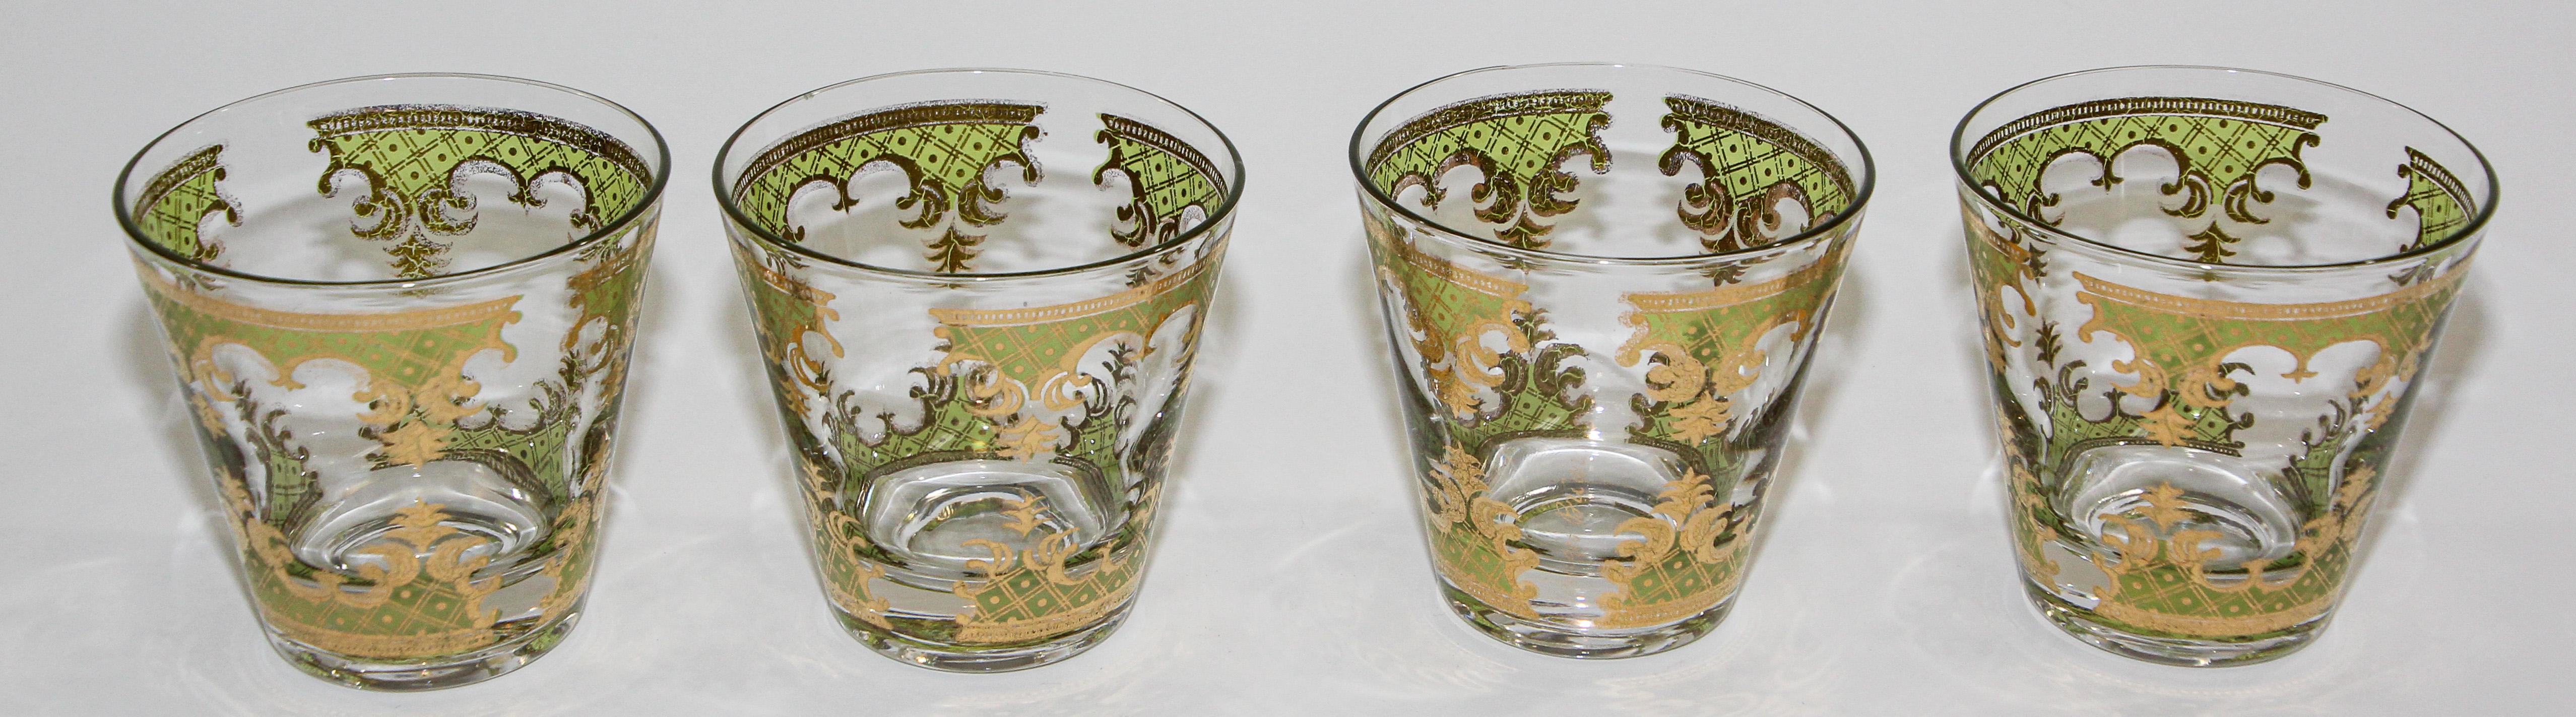 Vintage Georges Briard Mid-Century Modern glasses barware - Set of 4
Elegant exquisite vintage set of 4 rock glasses designed by Georges Briard.
They will create a dramatic display for a back bar or table setting.
Midcentury low ball cocktail